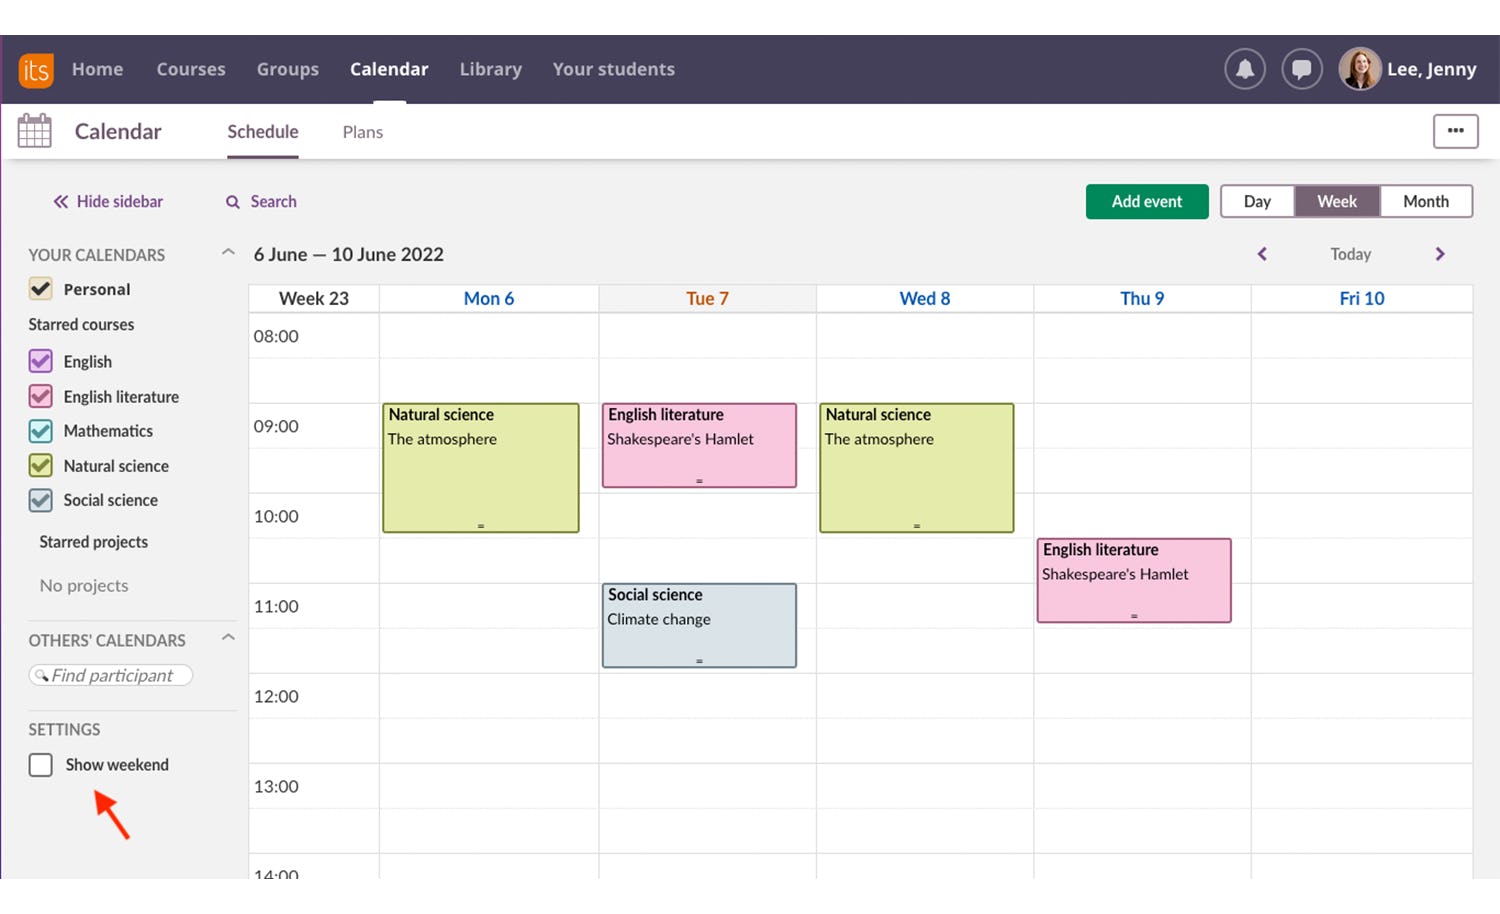 itslearning Software - Calendar: The calendar shows plans, tasks and homework and has a seamless integration with the planner and activities.